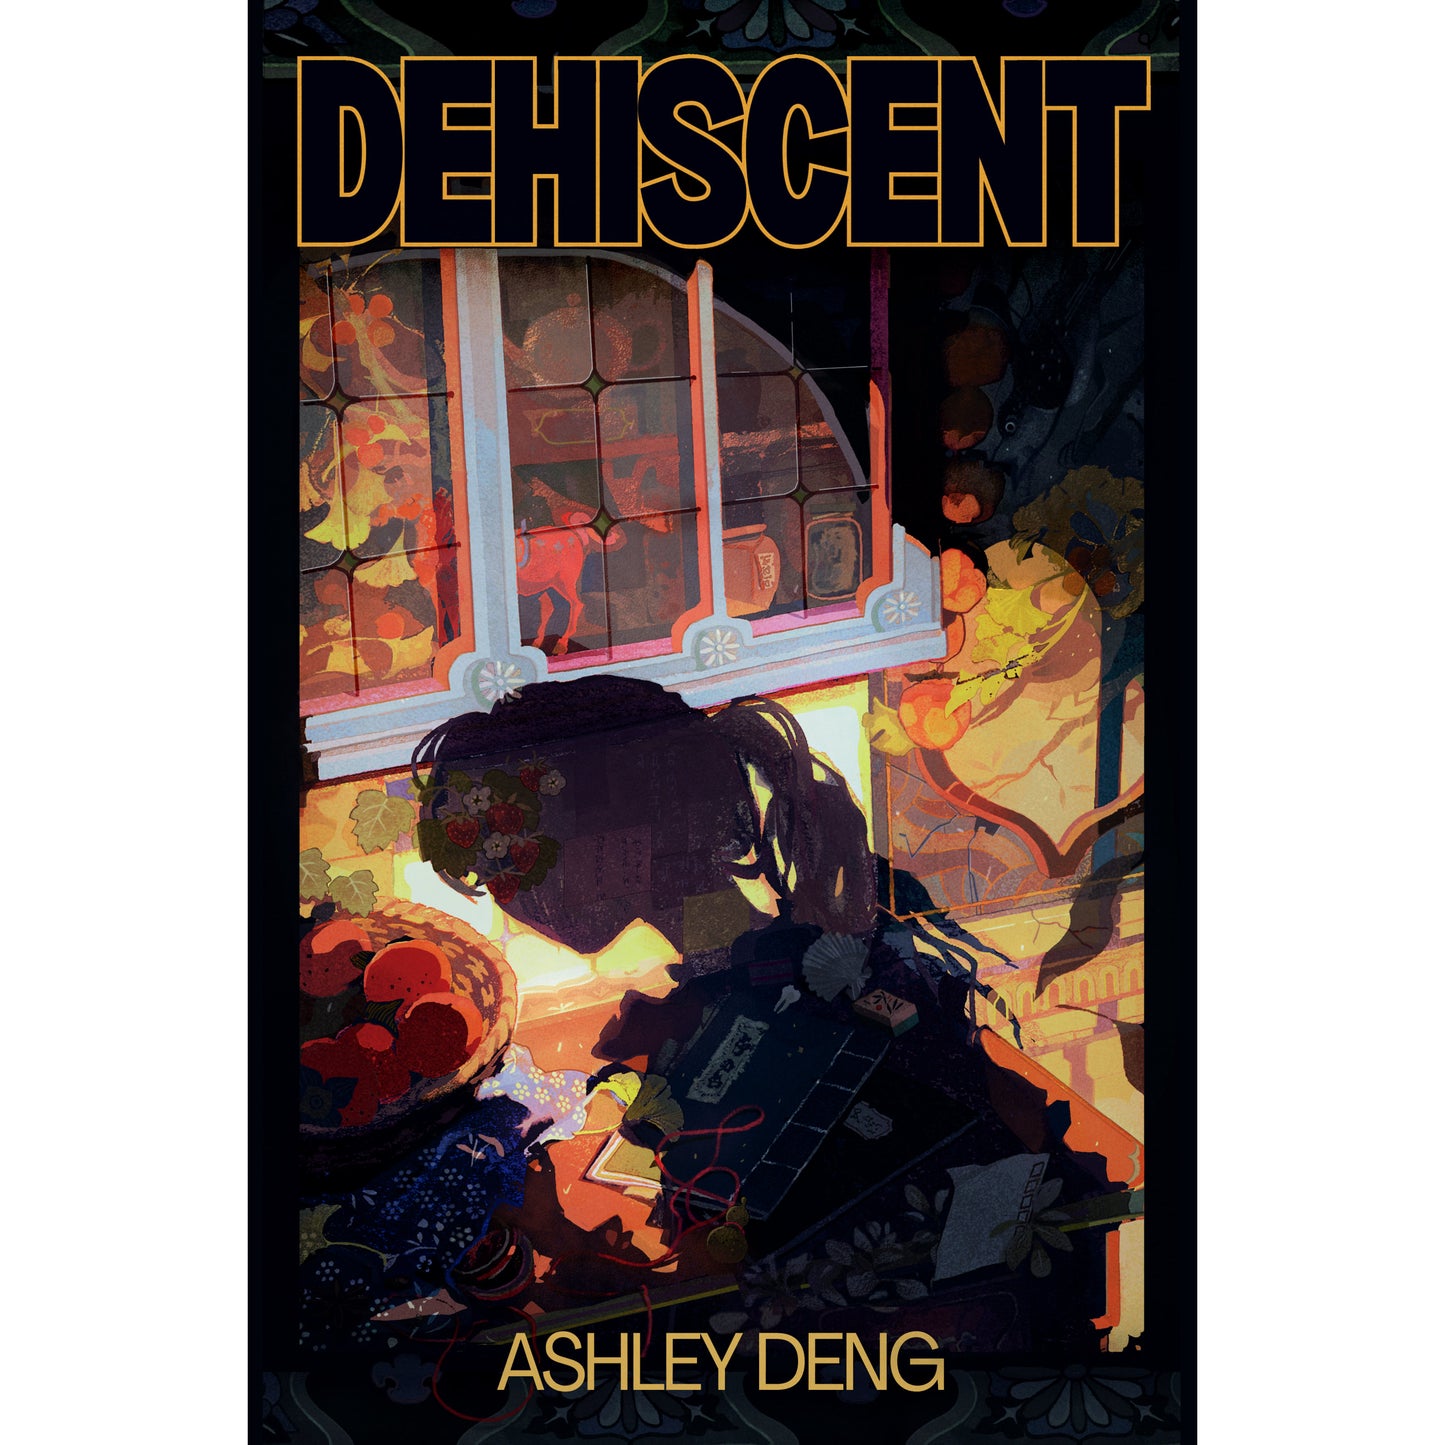 DEHISCENT - a novella by Ashley Deng (softcover; includes eBook)